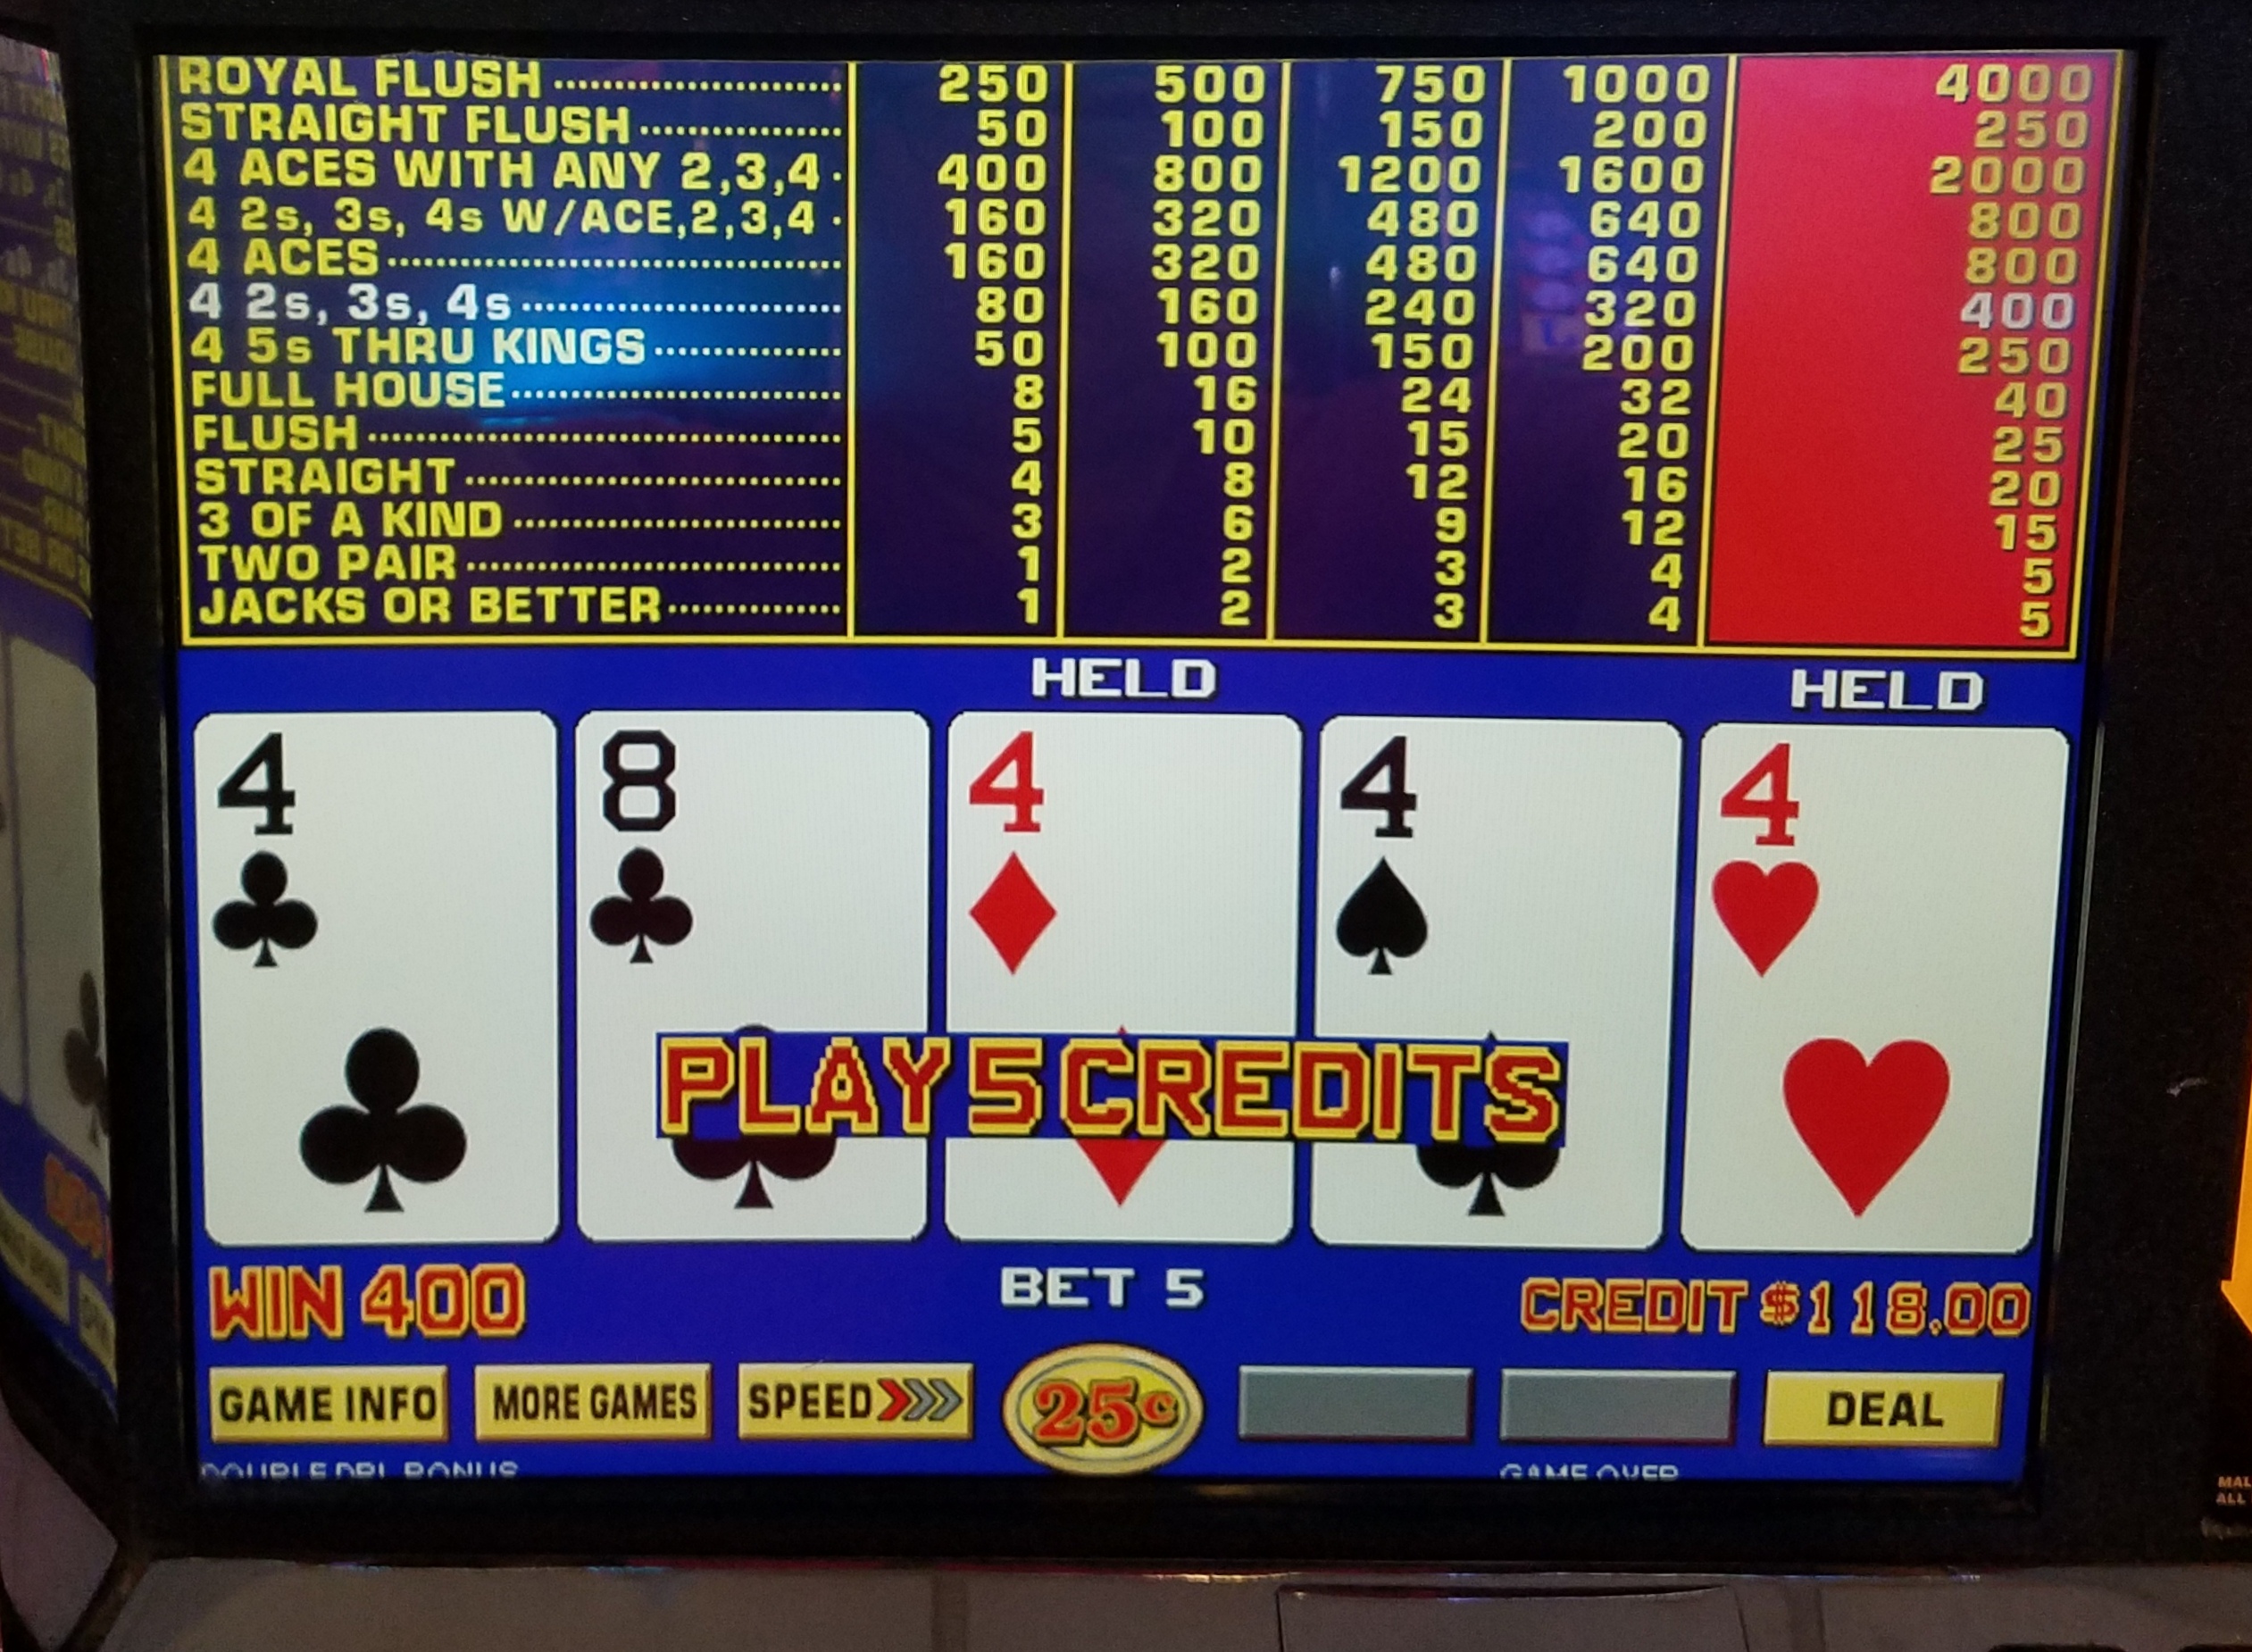 How to win at video poker in las vegas